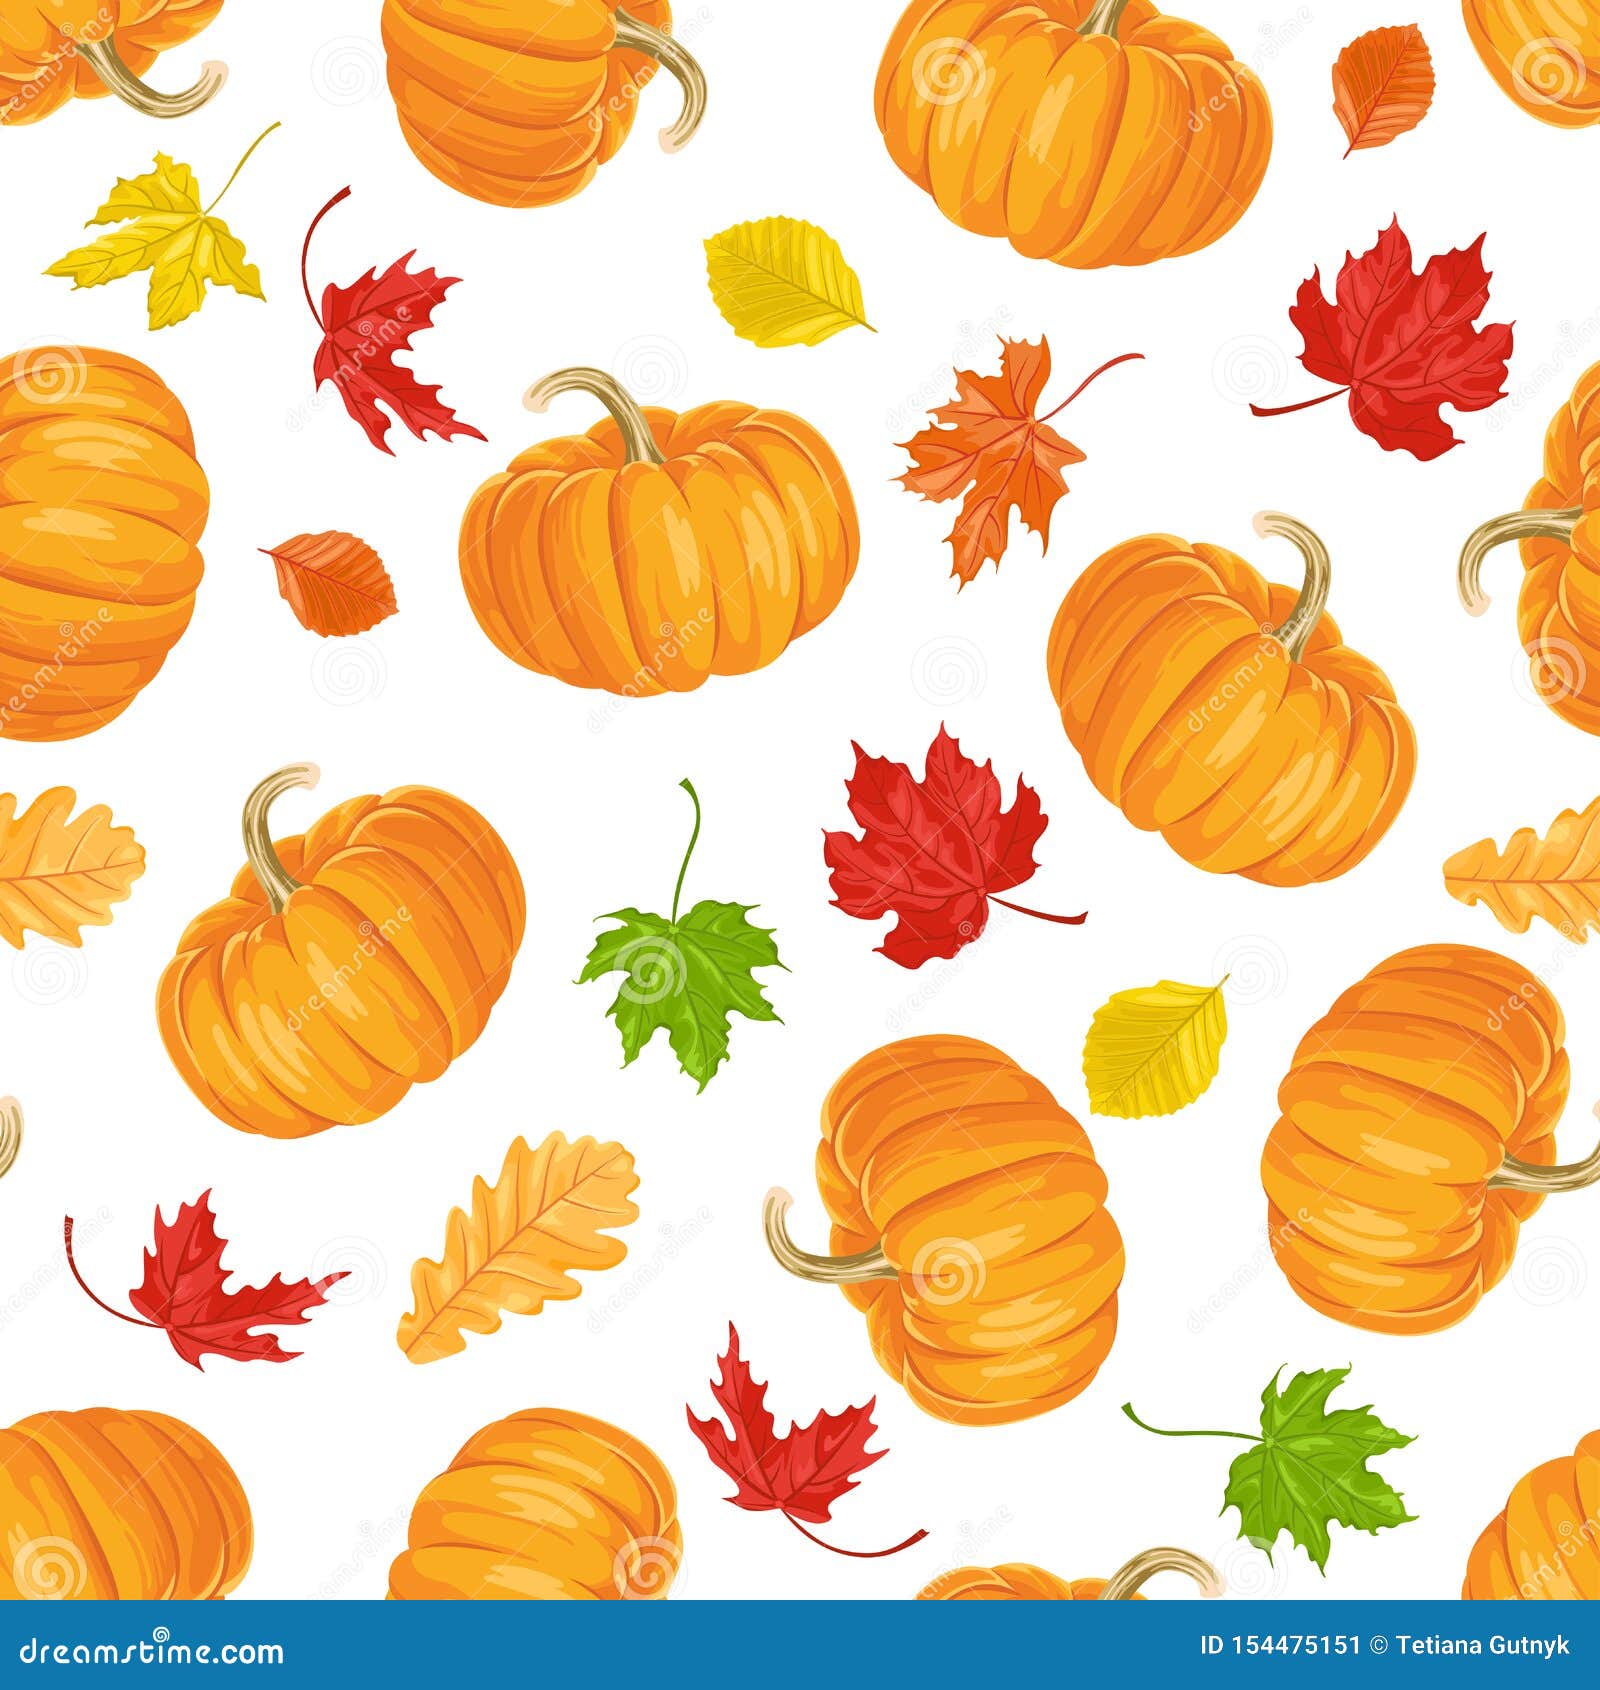 Autumn Seamless Pattern. Orange Pumpkins and Colorful Falling Leaves ...